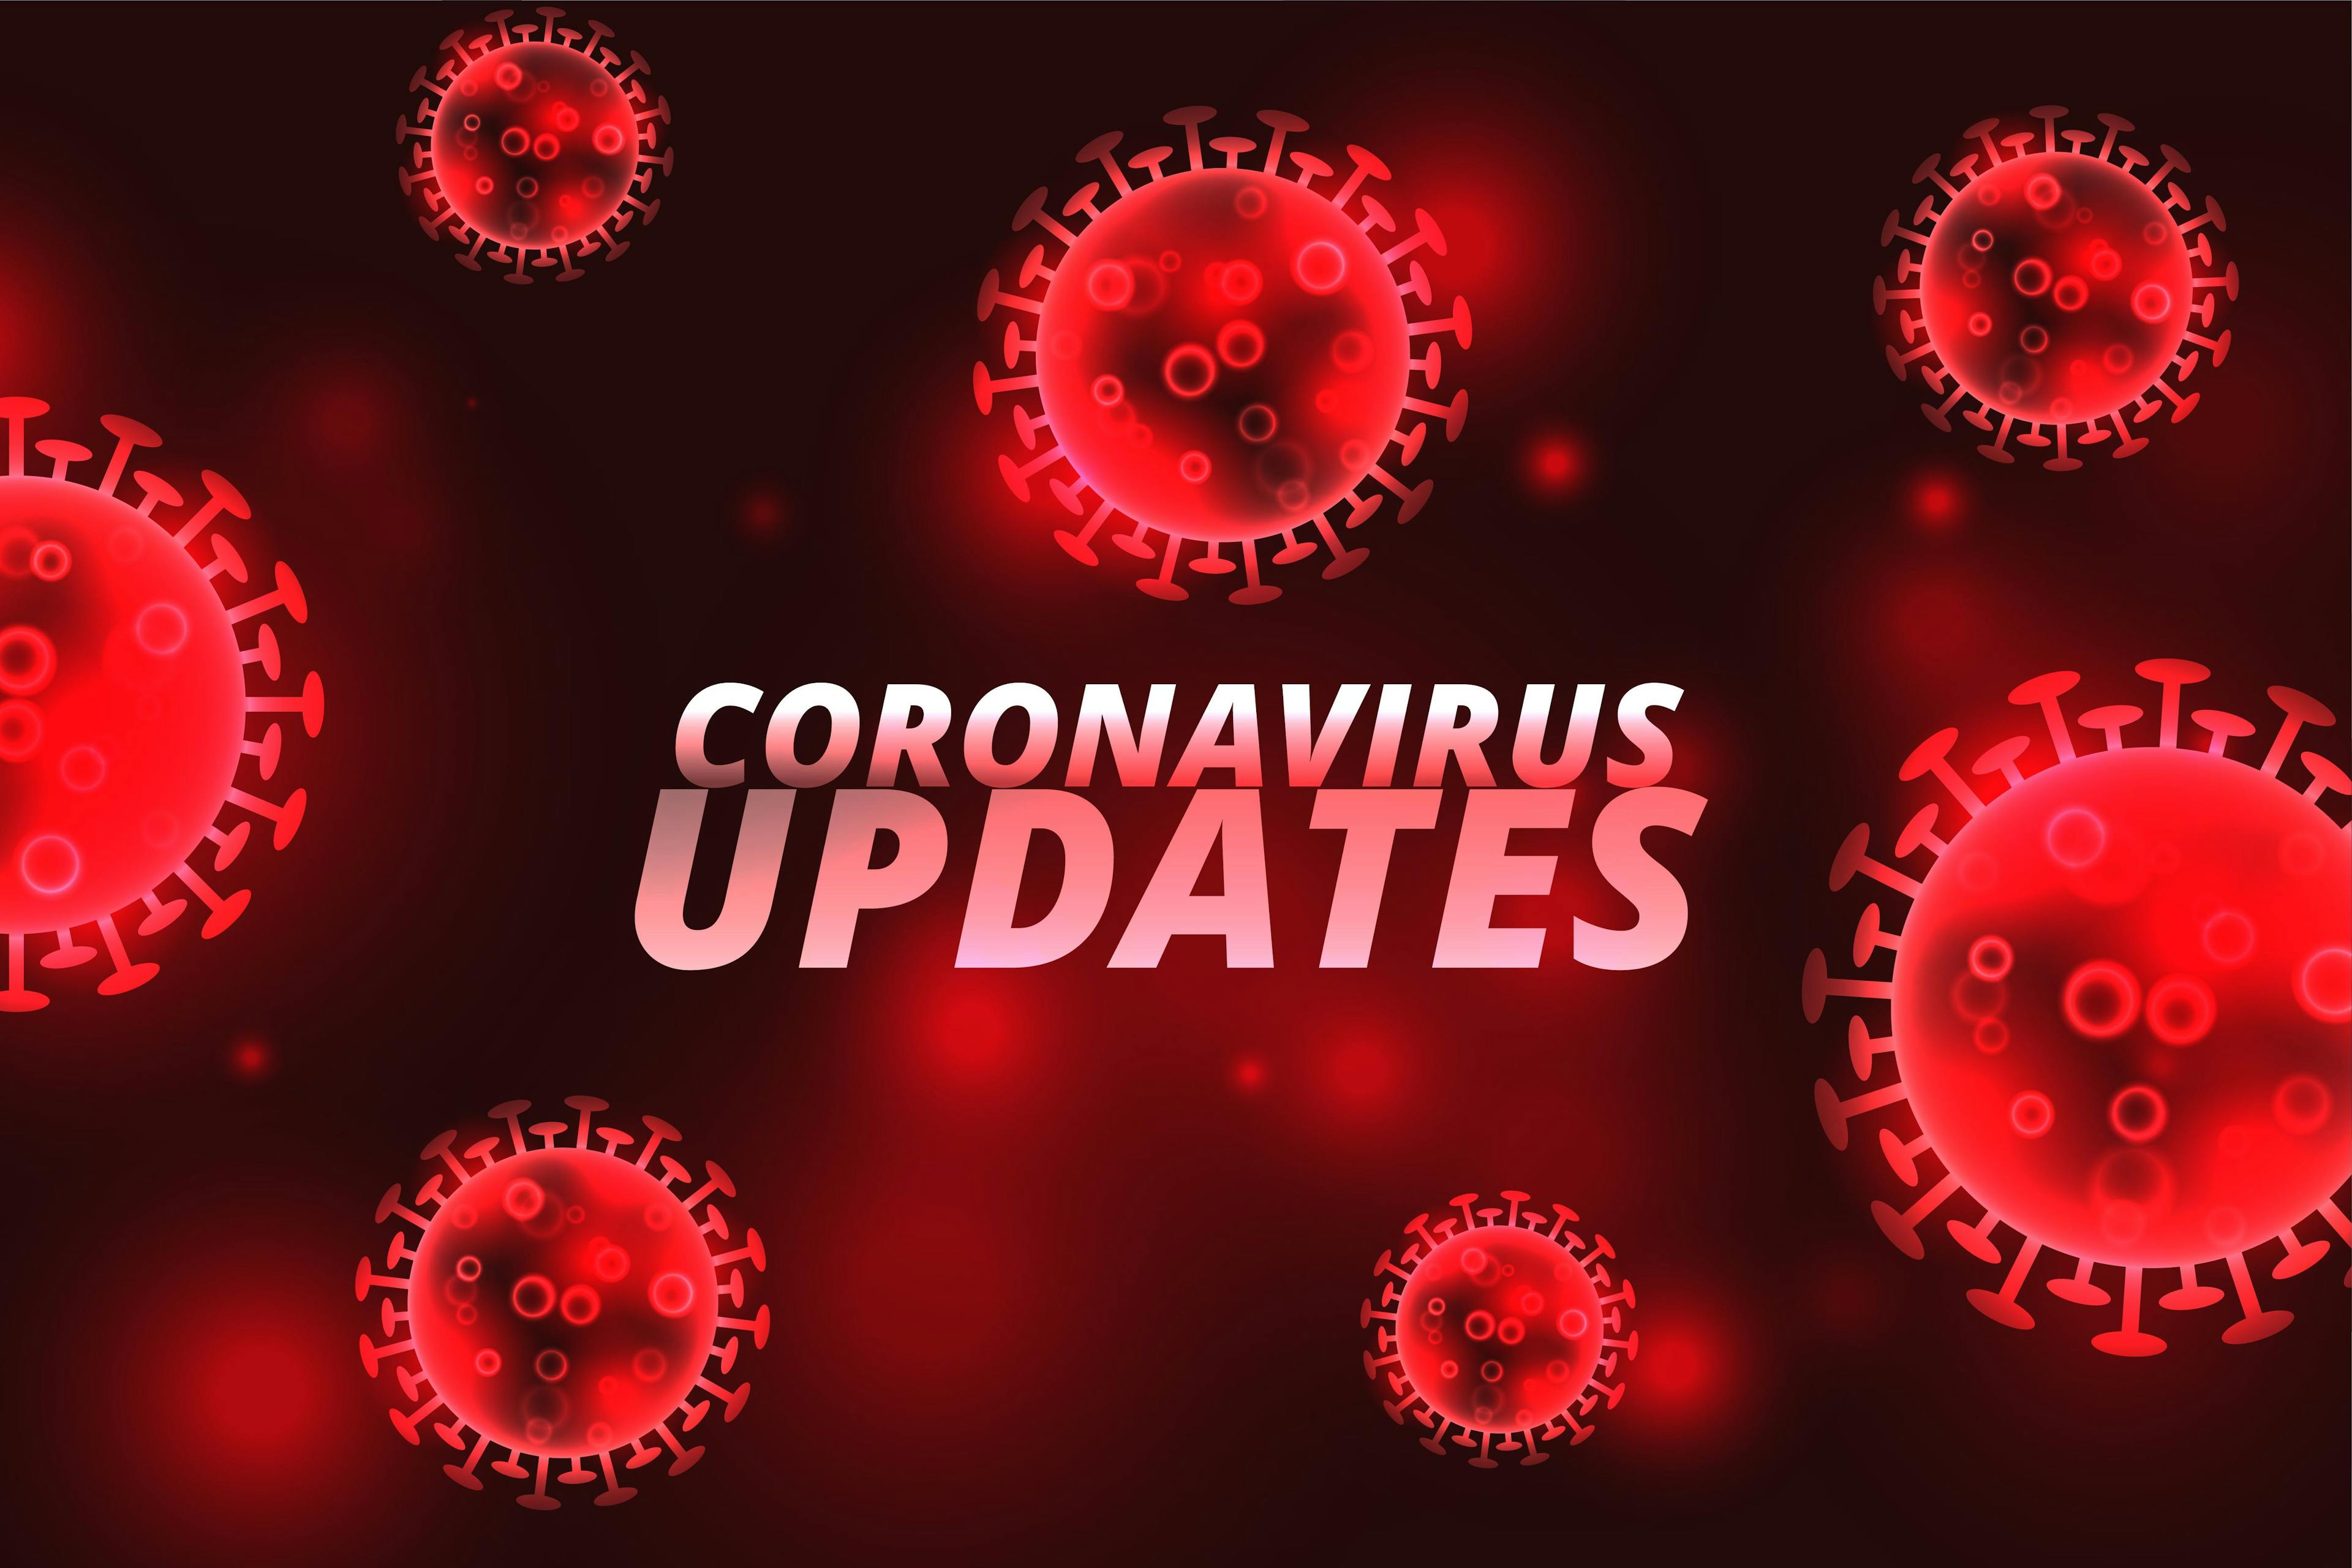 COVID-19 Updates: US Vaccinations and Global Cases and Deaths as of May 24, 2021